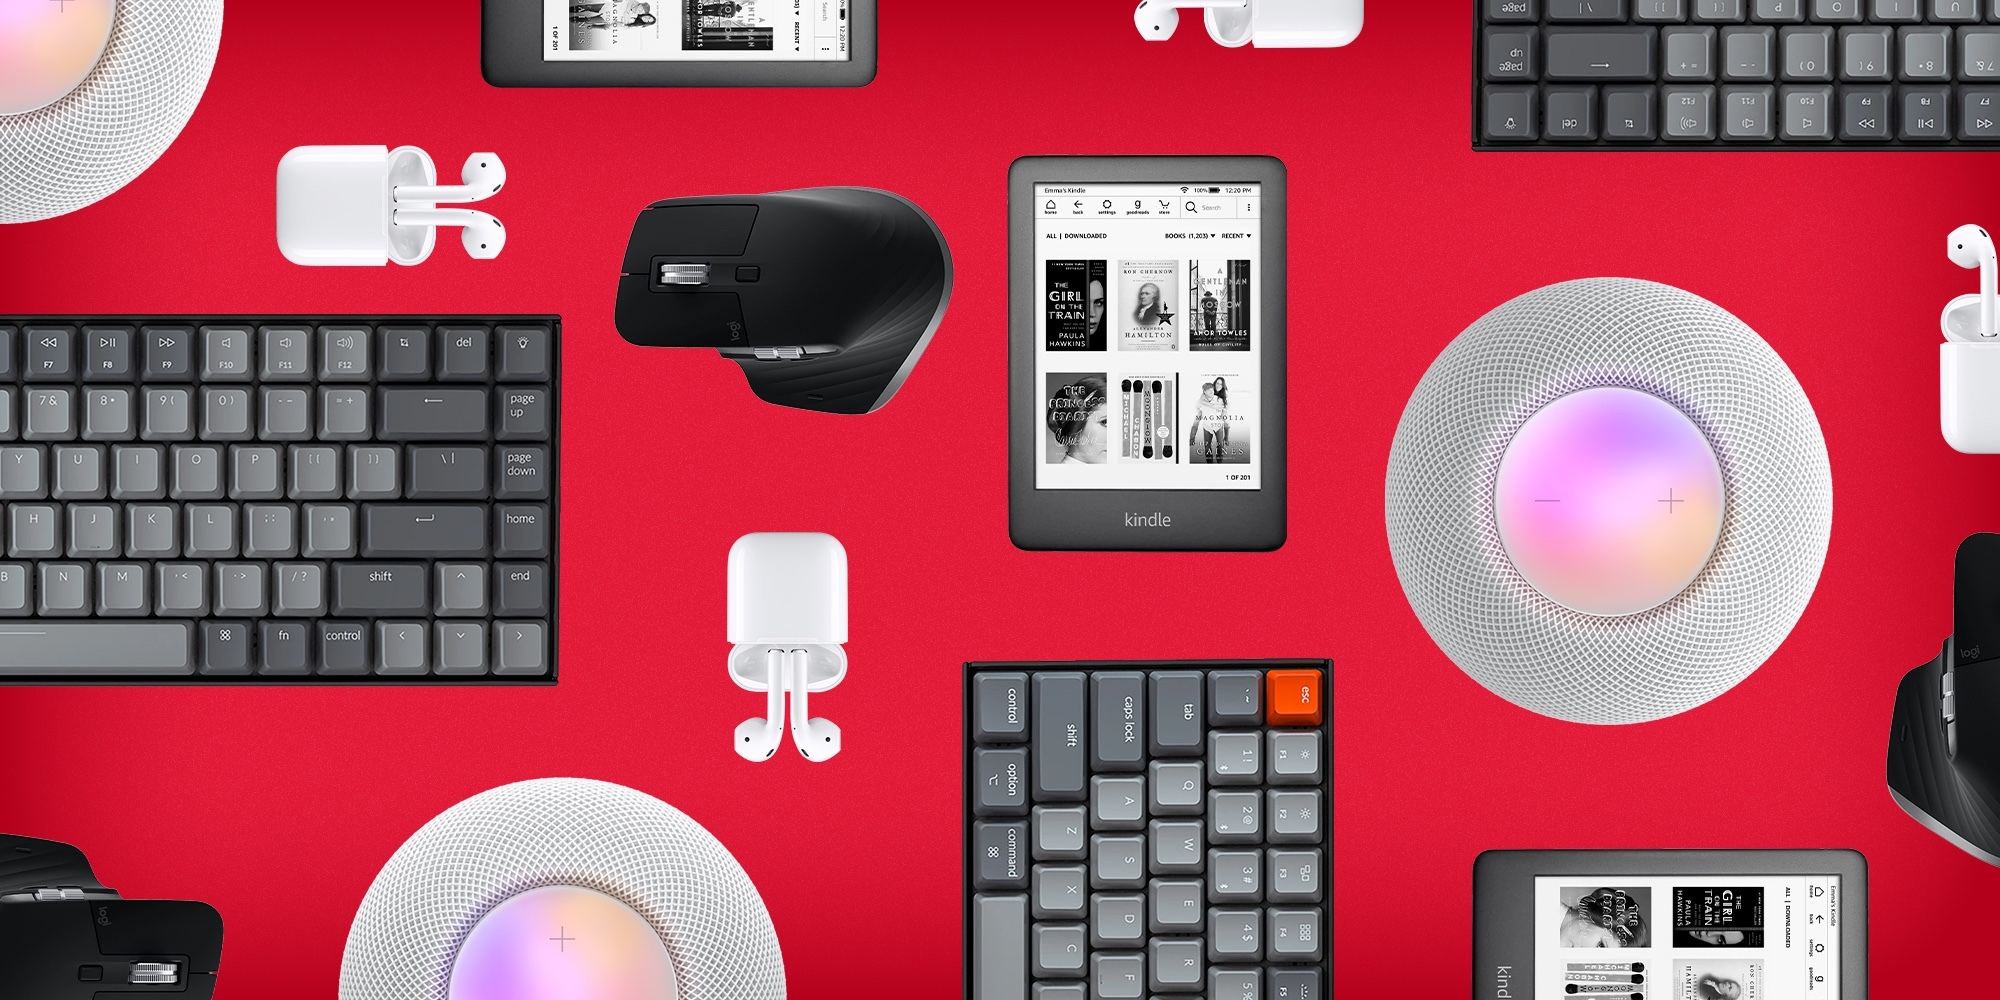 9to5Mac Gift Guide: The best last-minute tech gifts priced under